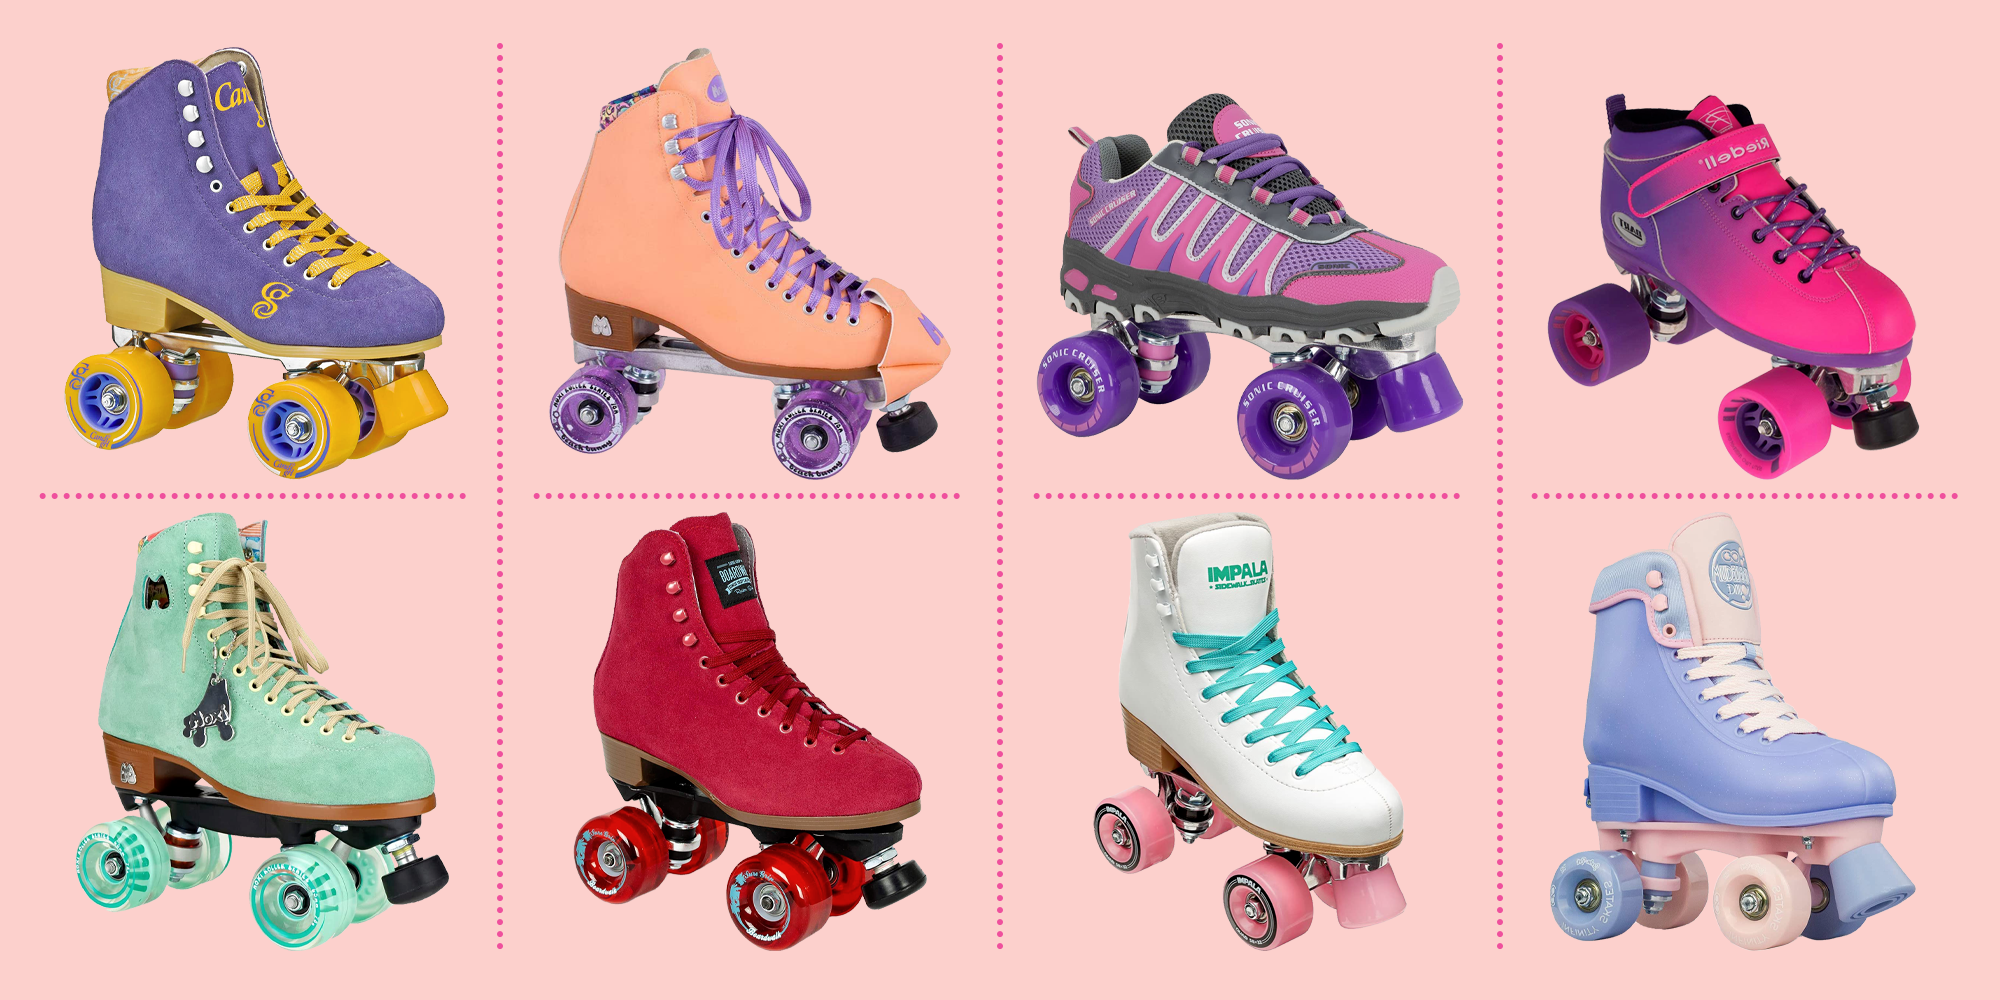 Skate Gear Soft Cute Roller Skates Christmas and Holiday Gifts for Girls 